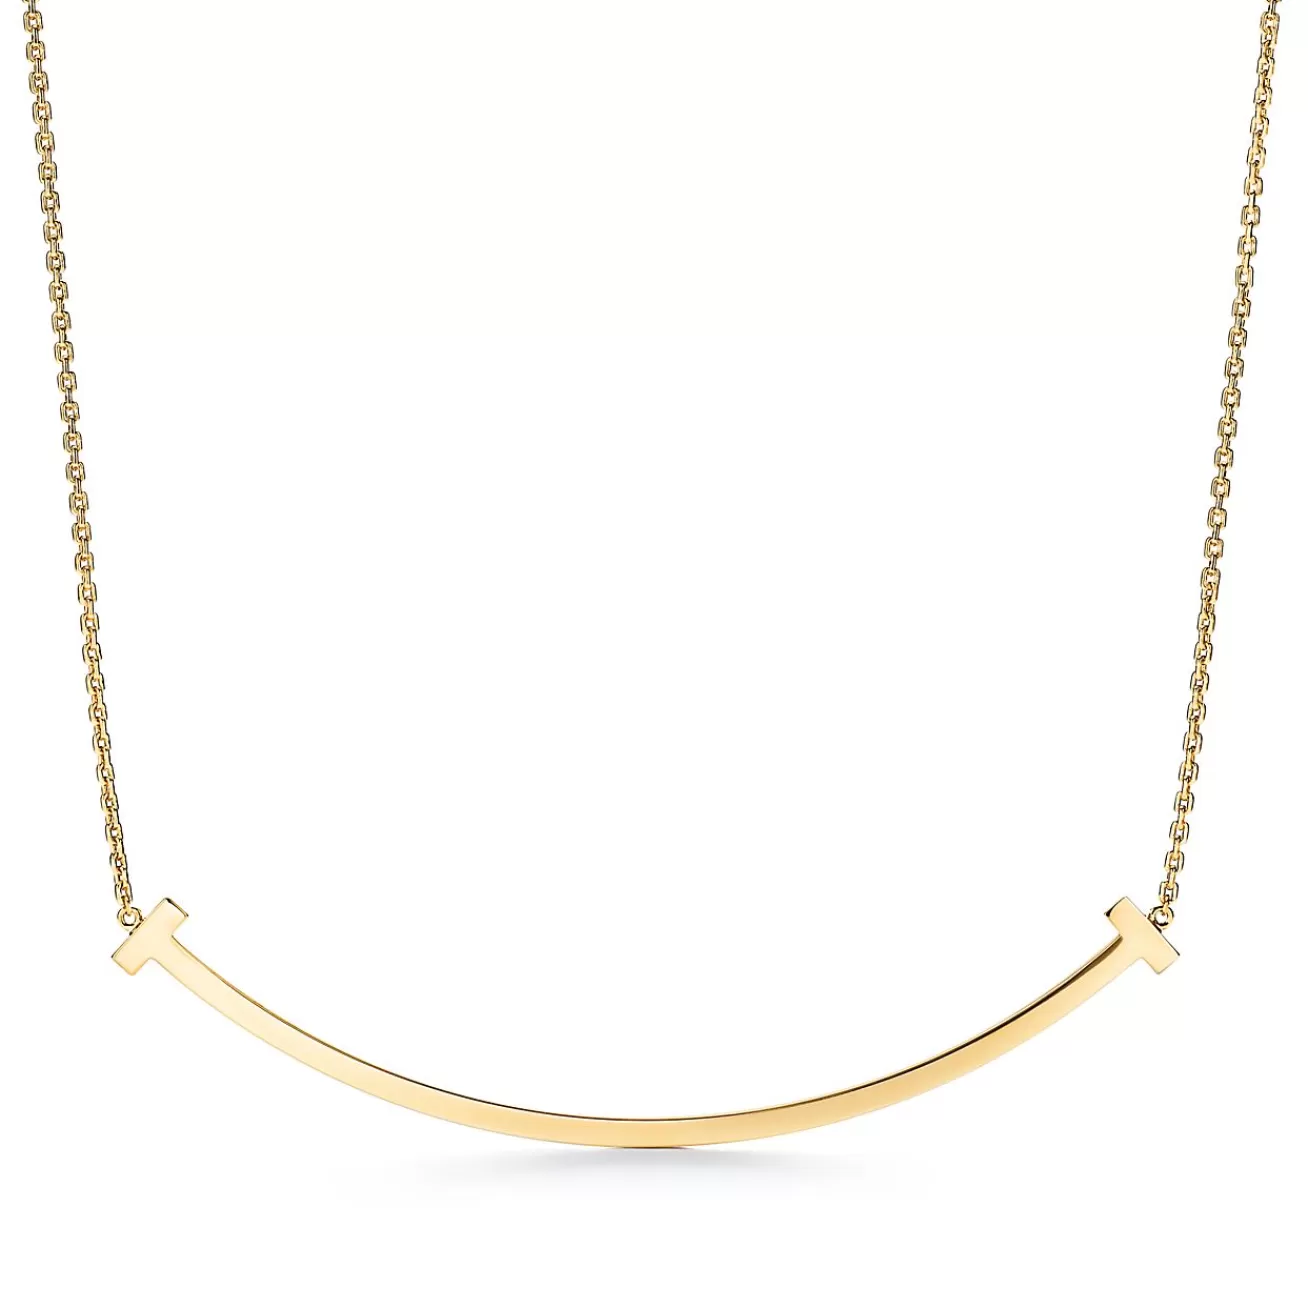 Tiffany & Co. Tiffany T extra large smile pendant in 18k gold. | ^ Necklaces & Pendants | Men's Jewelry